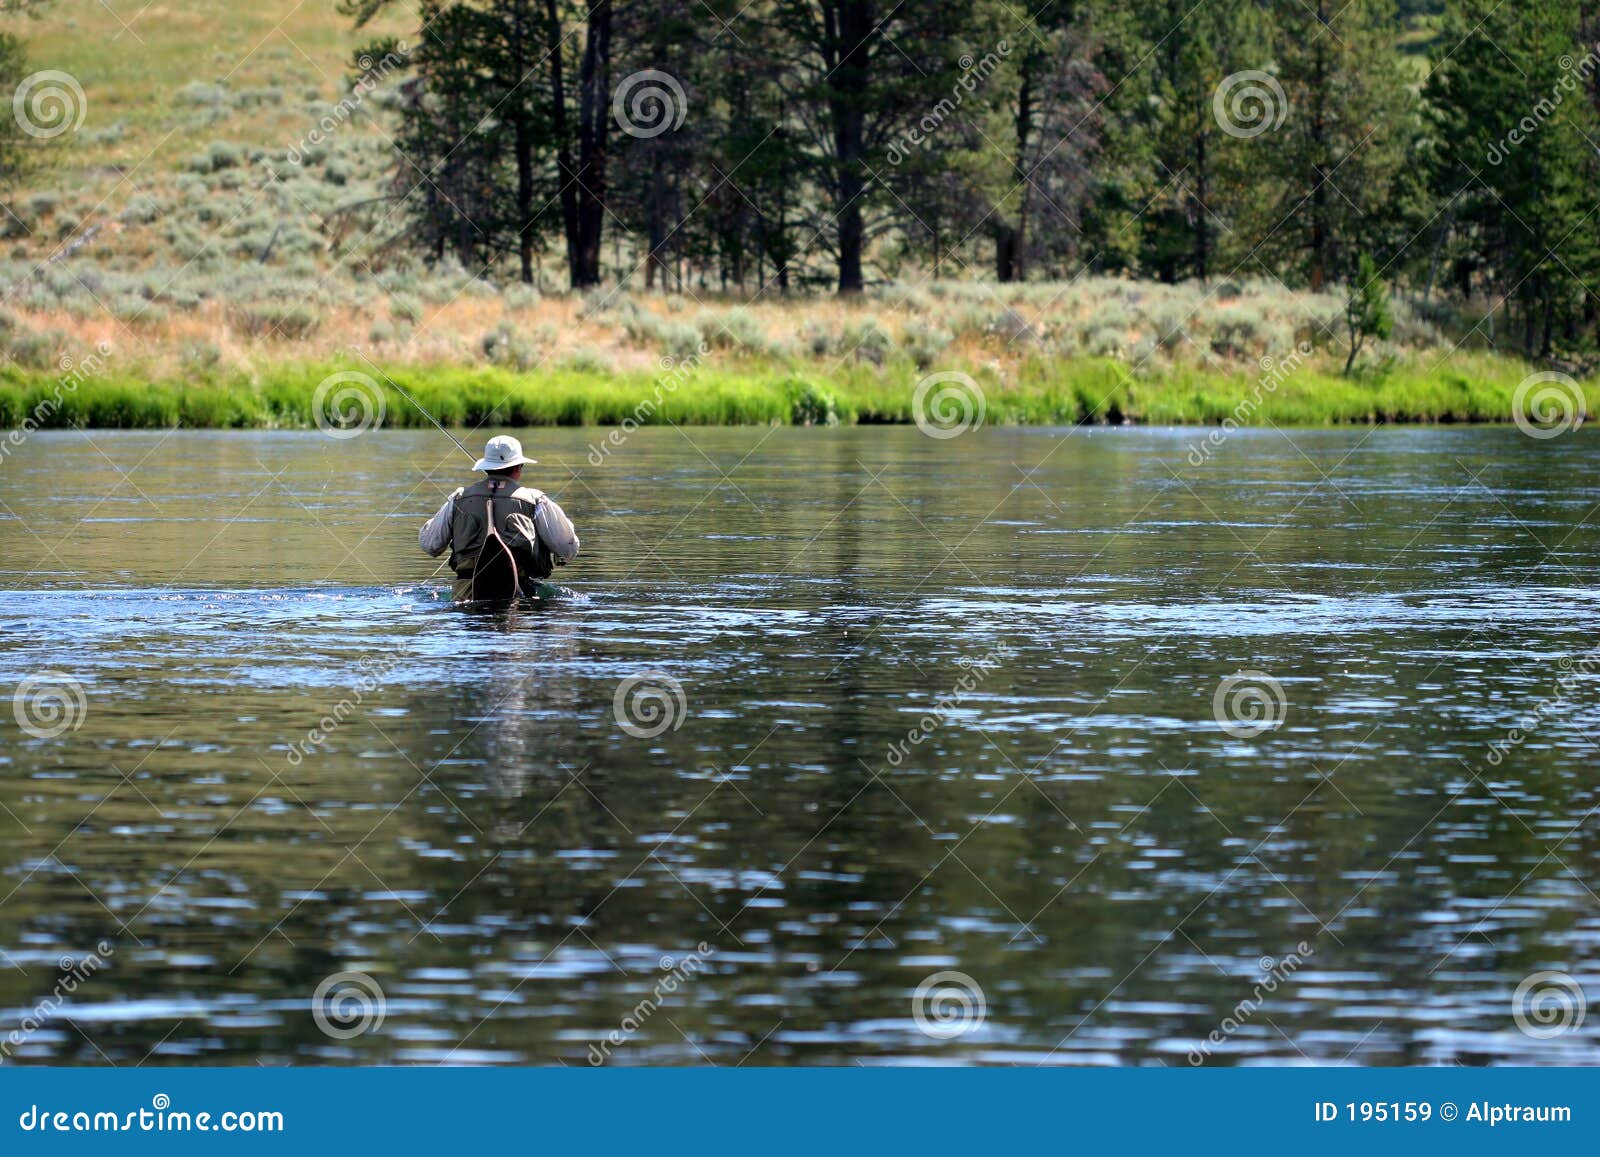 wading in yellowstone river